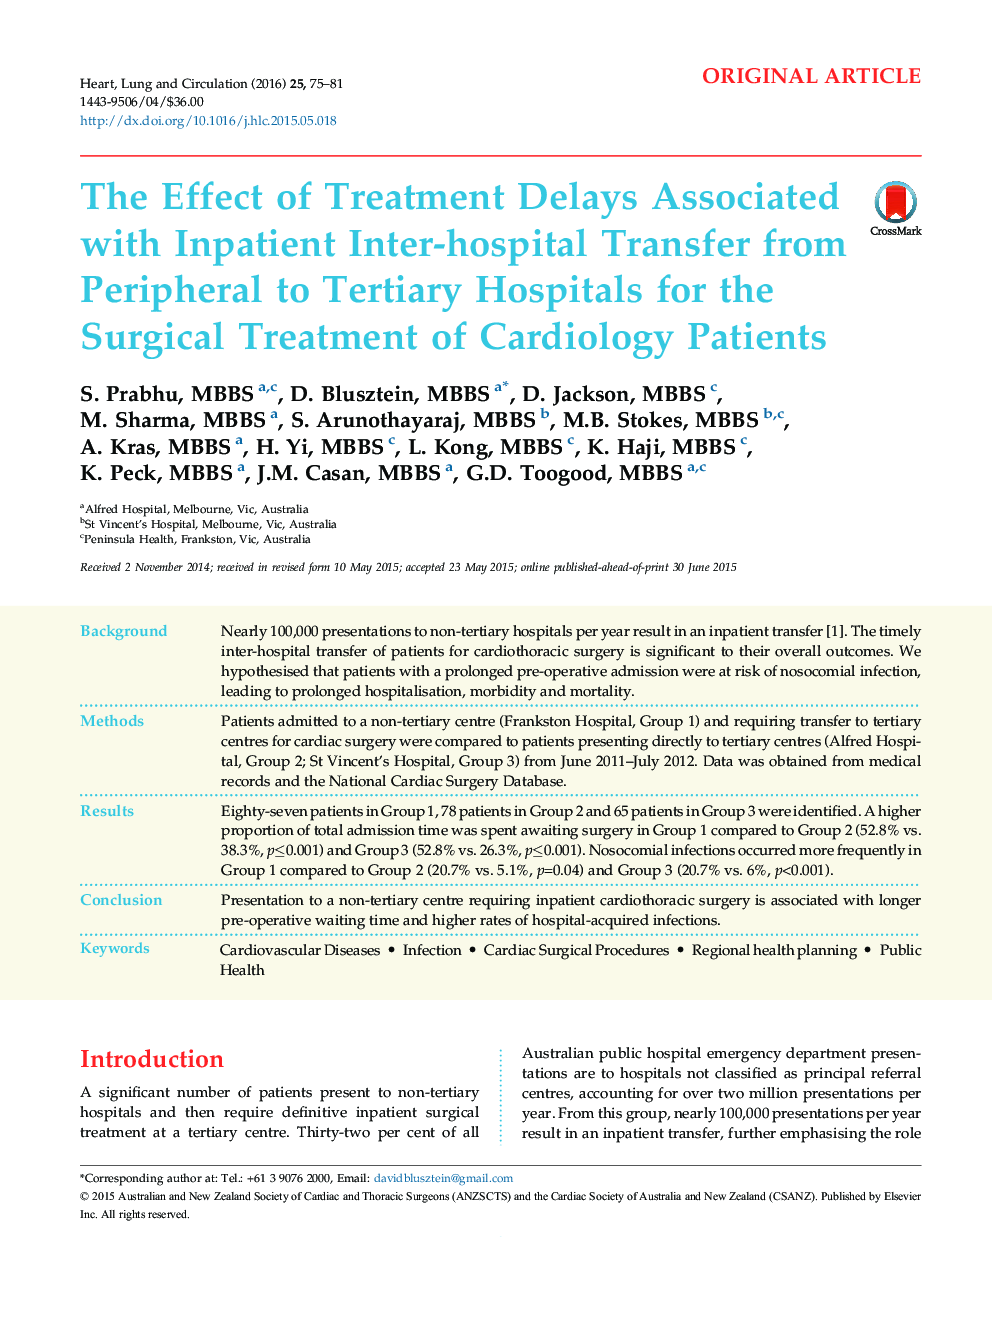 The Effect of Treatment Delays Associated with Inpatient Inter-hospital Transfer from Peripheral to Tertiary Hospitals for the Surgical Treatment of Cardiology Patients